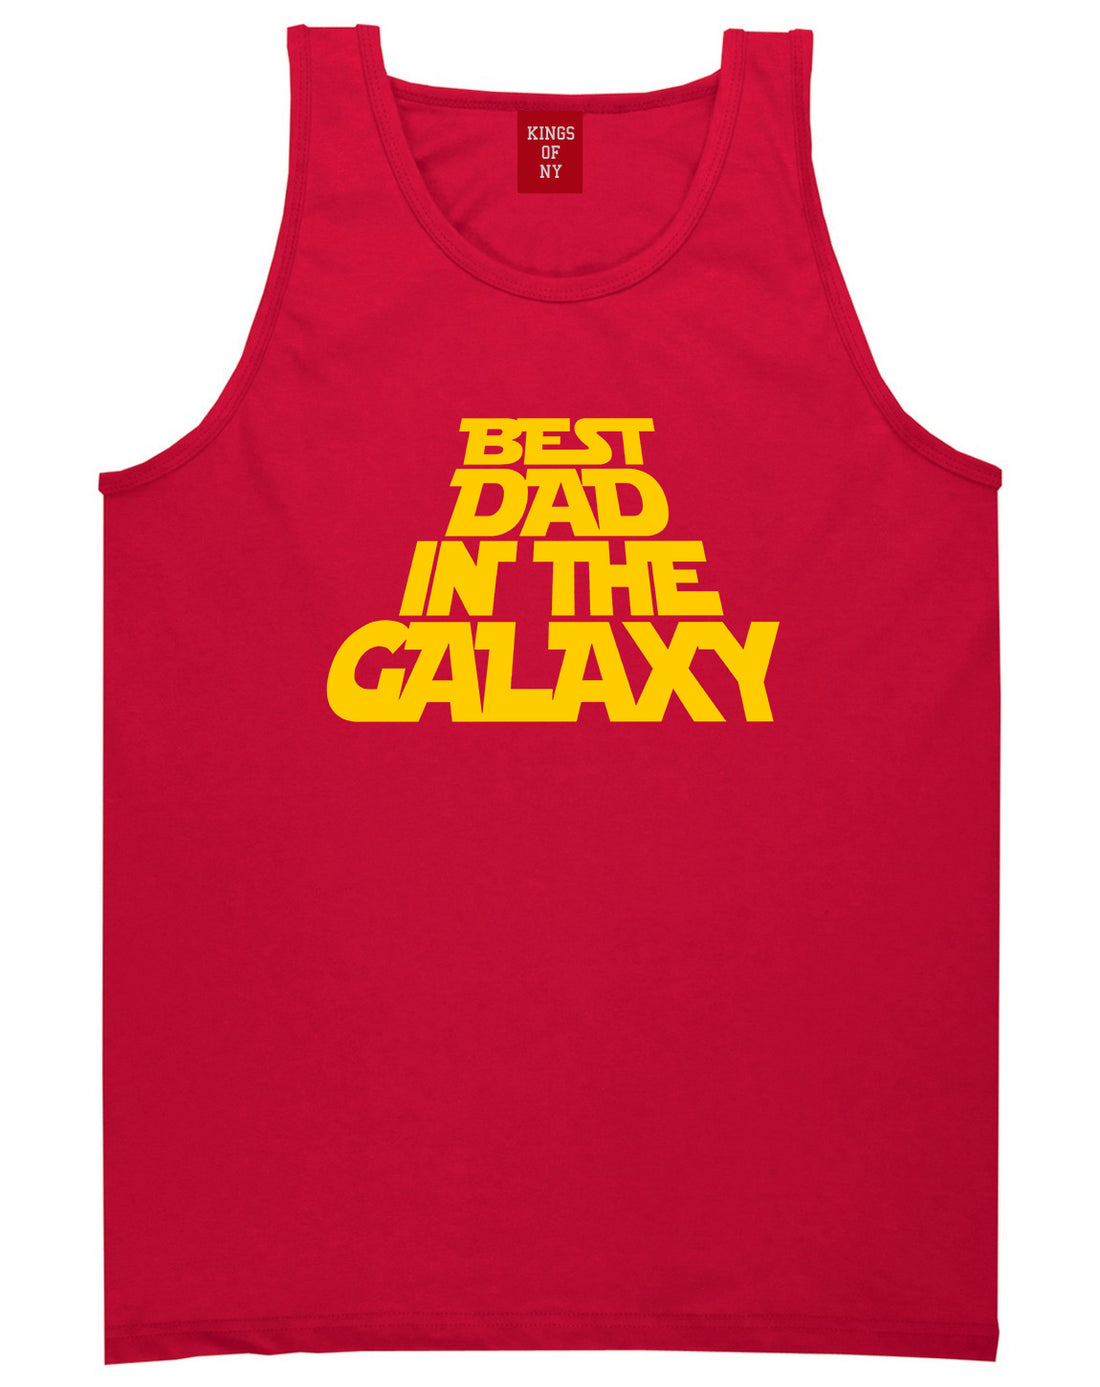 Best Dad In The Galaxy Mens Tank Top T-Shirt Red